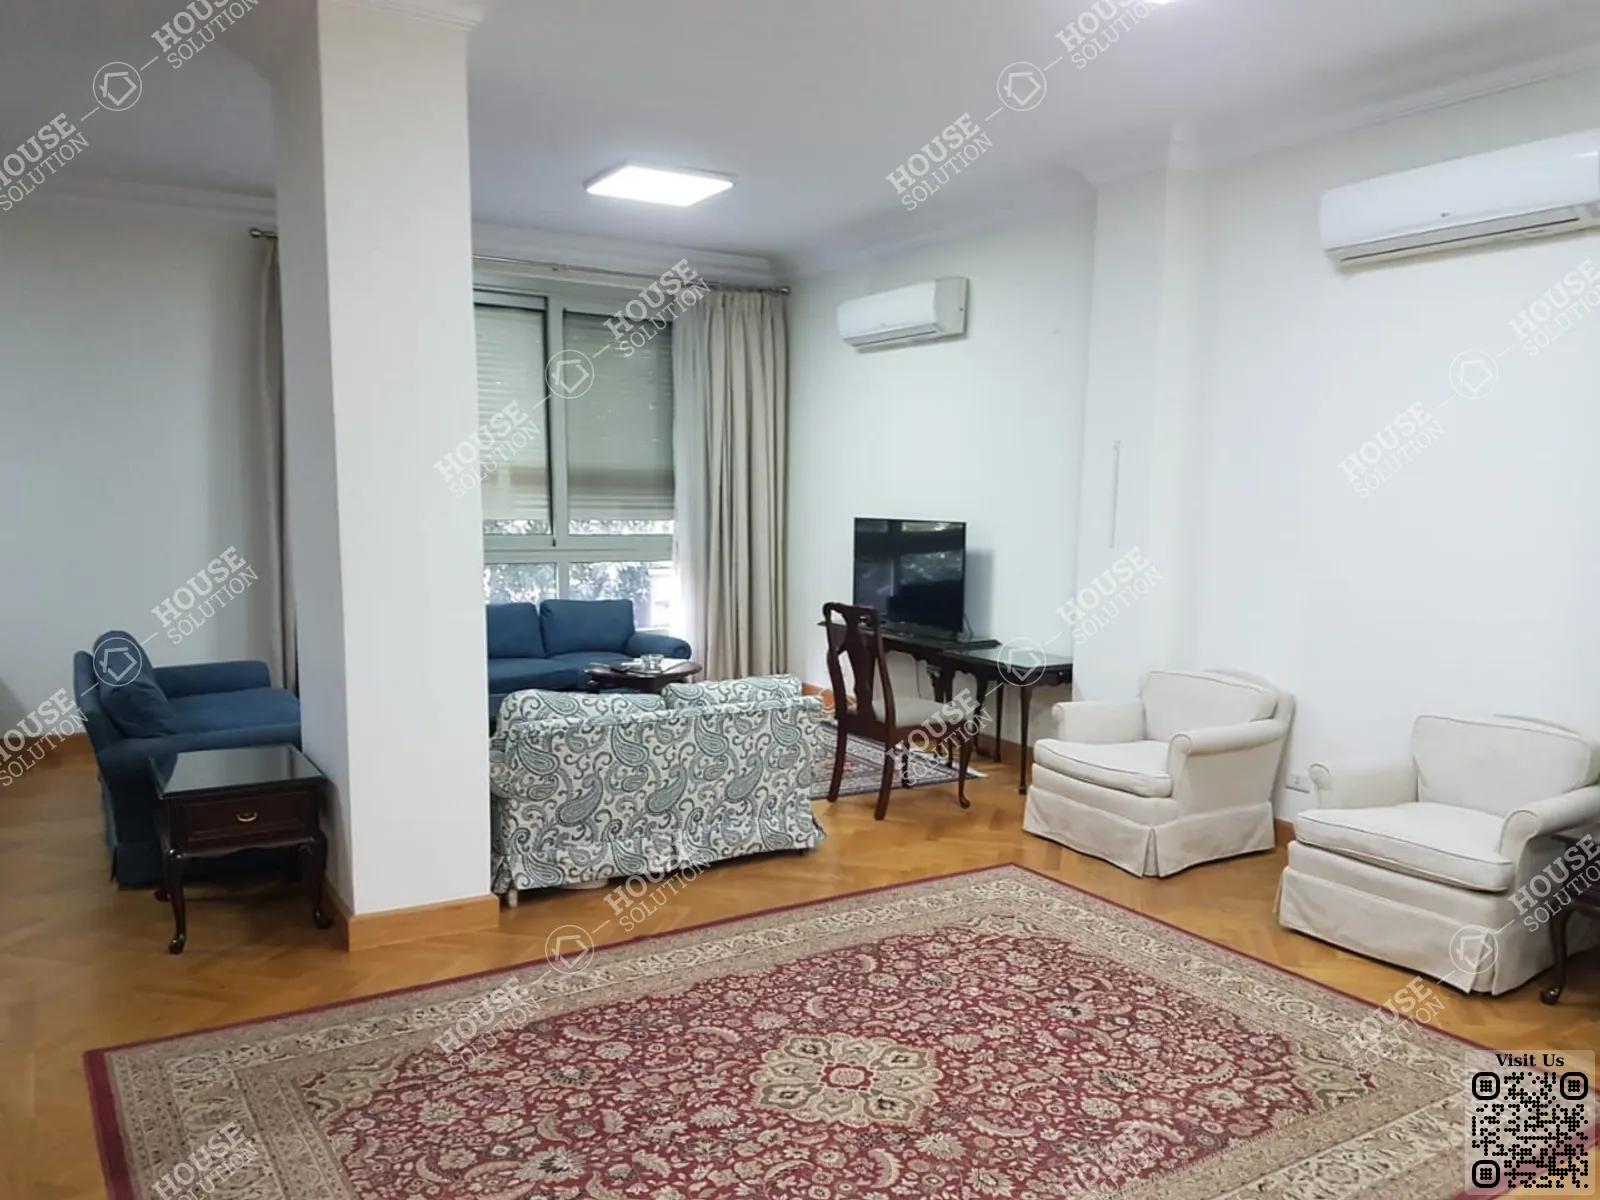 RECEPTION  @ Apartments For Rent In Maadi Maadi Sarayat Area: 185 m² consists of 2 Bedrooms 2 Bathrooms Furnished 5 stars #4351-1